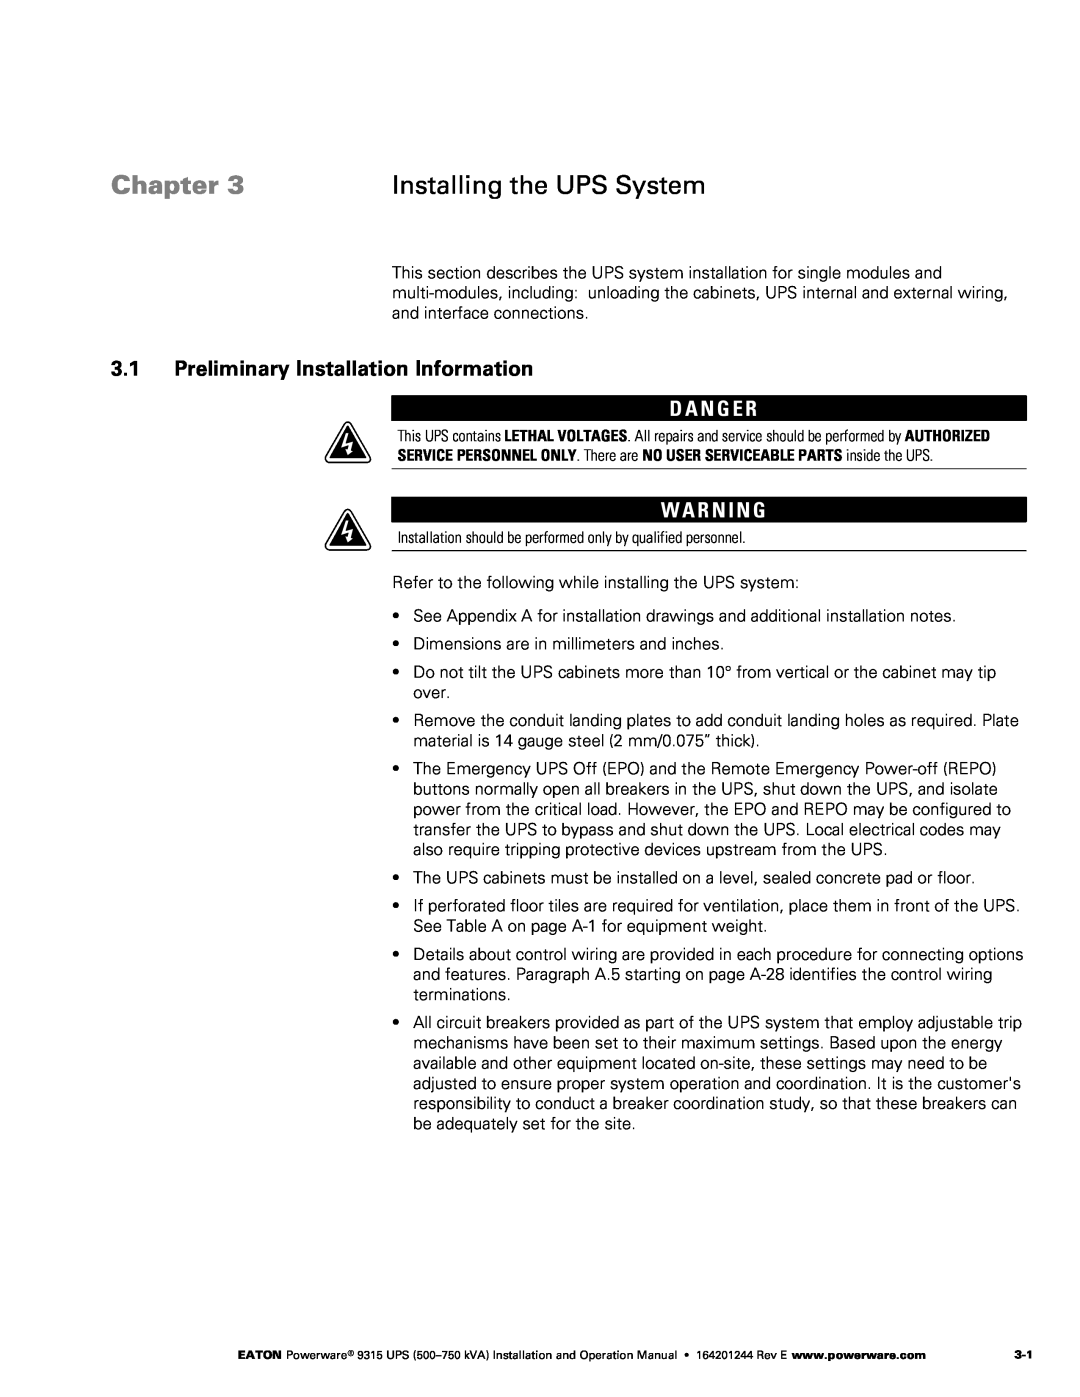 Powerware Powerware 9315 Installing the UPS System, Preliminary Installation Information, D A N G E R, Chapter 